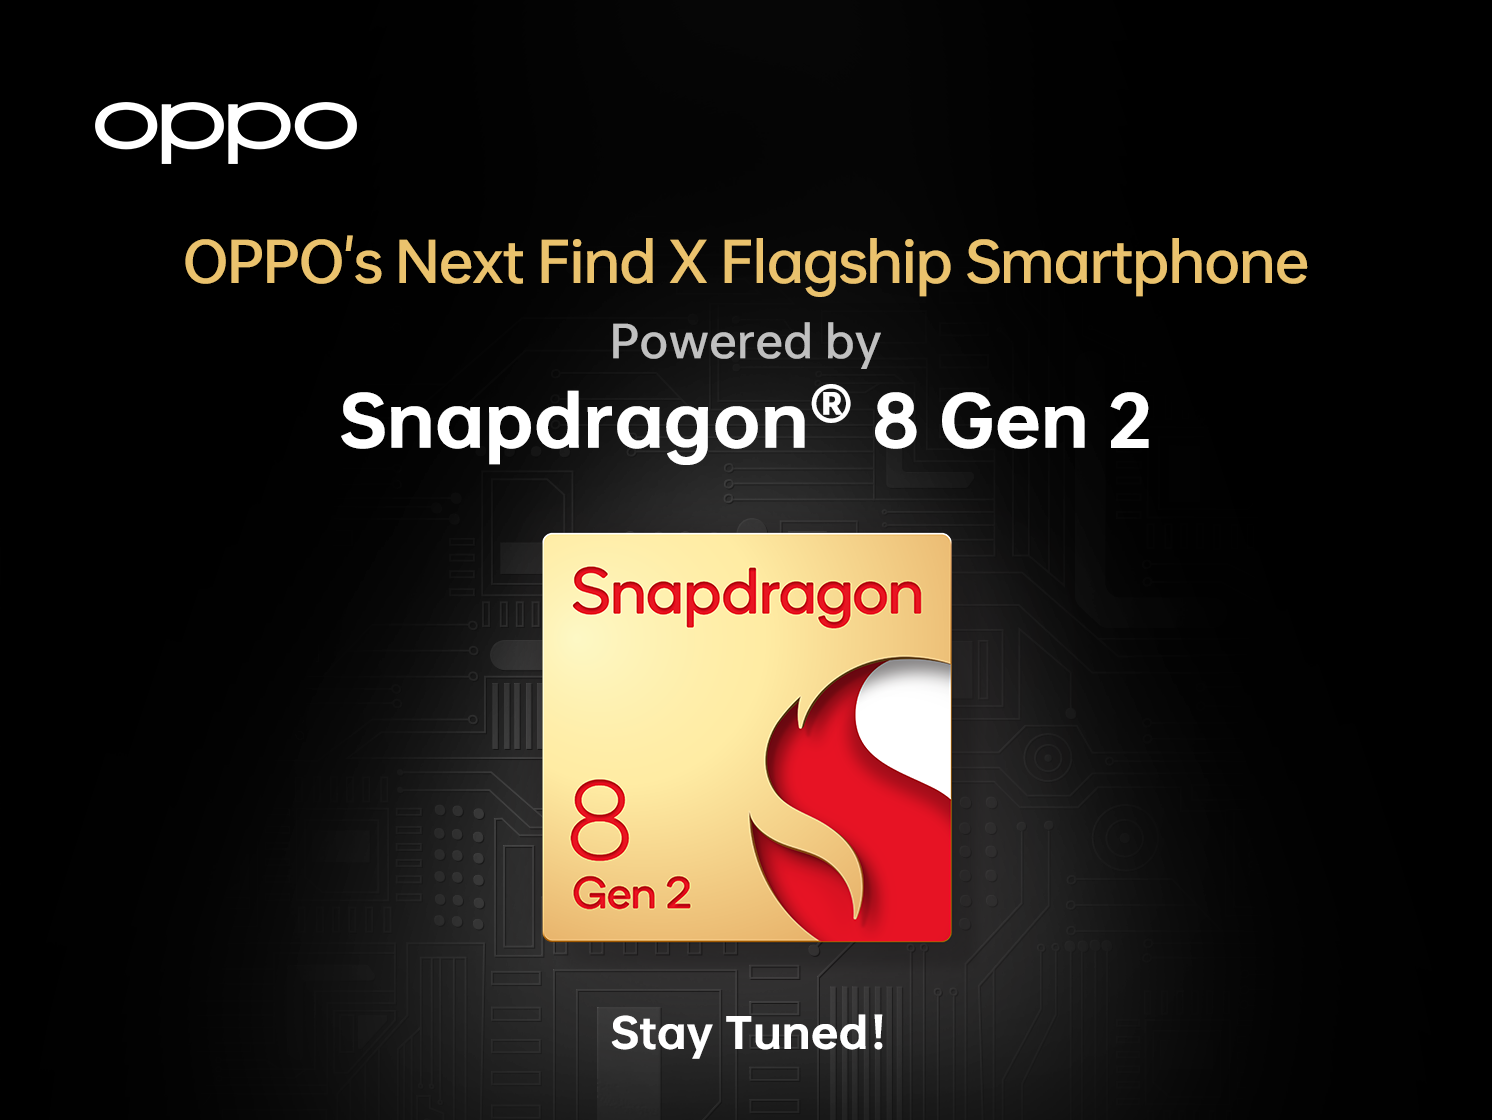 OPPO’s next Find X flagship smartphone will be one of the firsts to be powered by the Premium Snapdragon 8 Gen 2 Mobile Platform